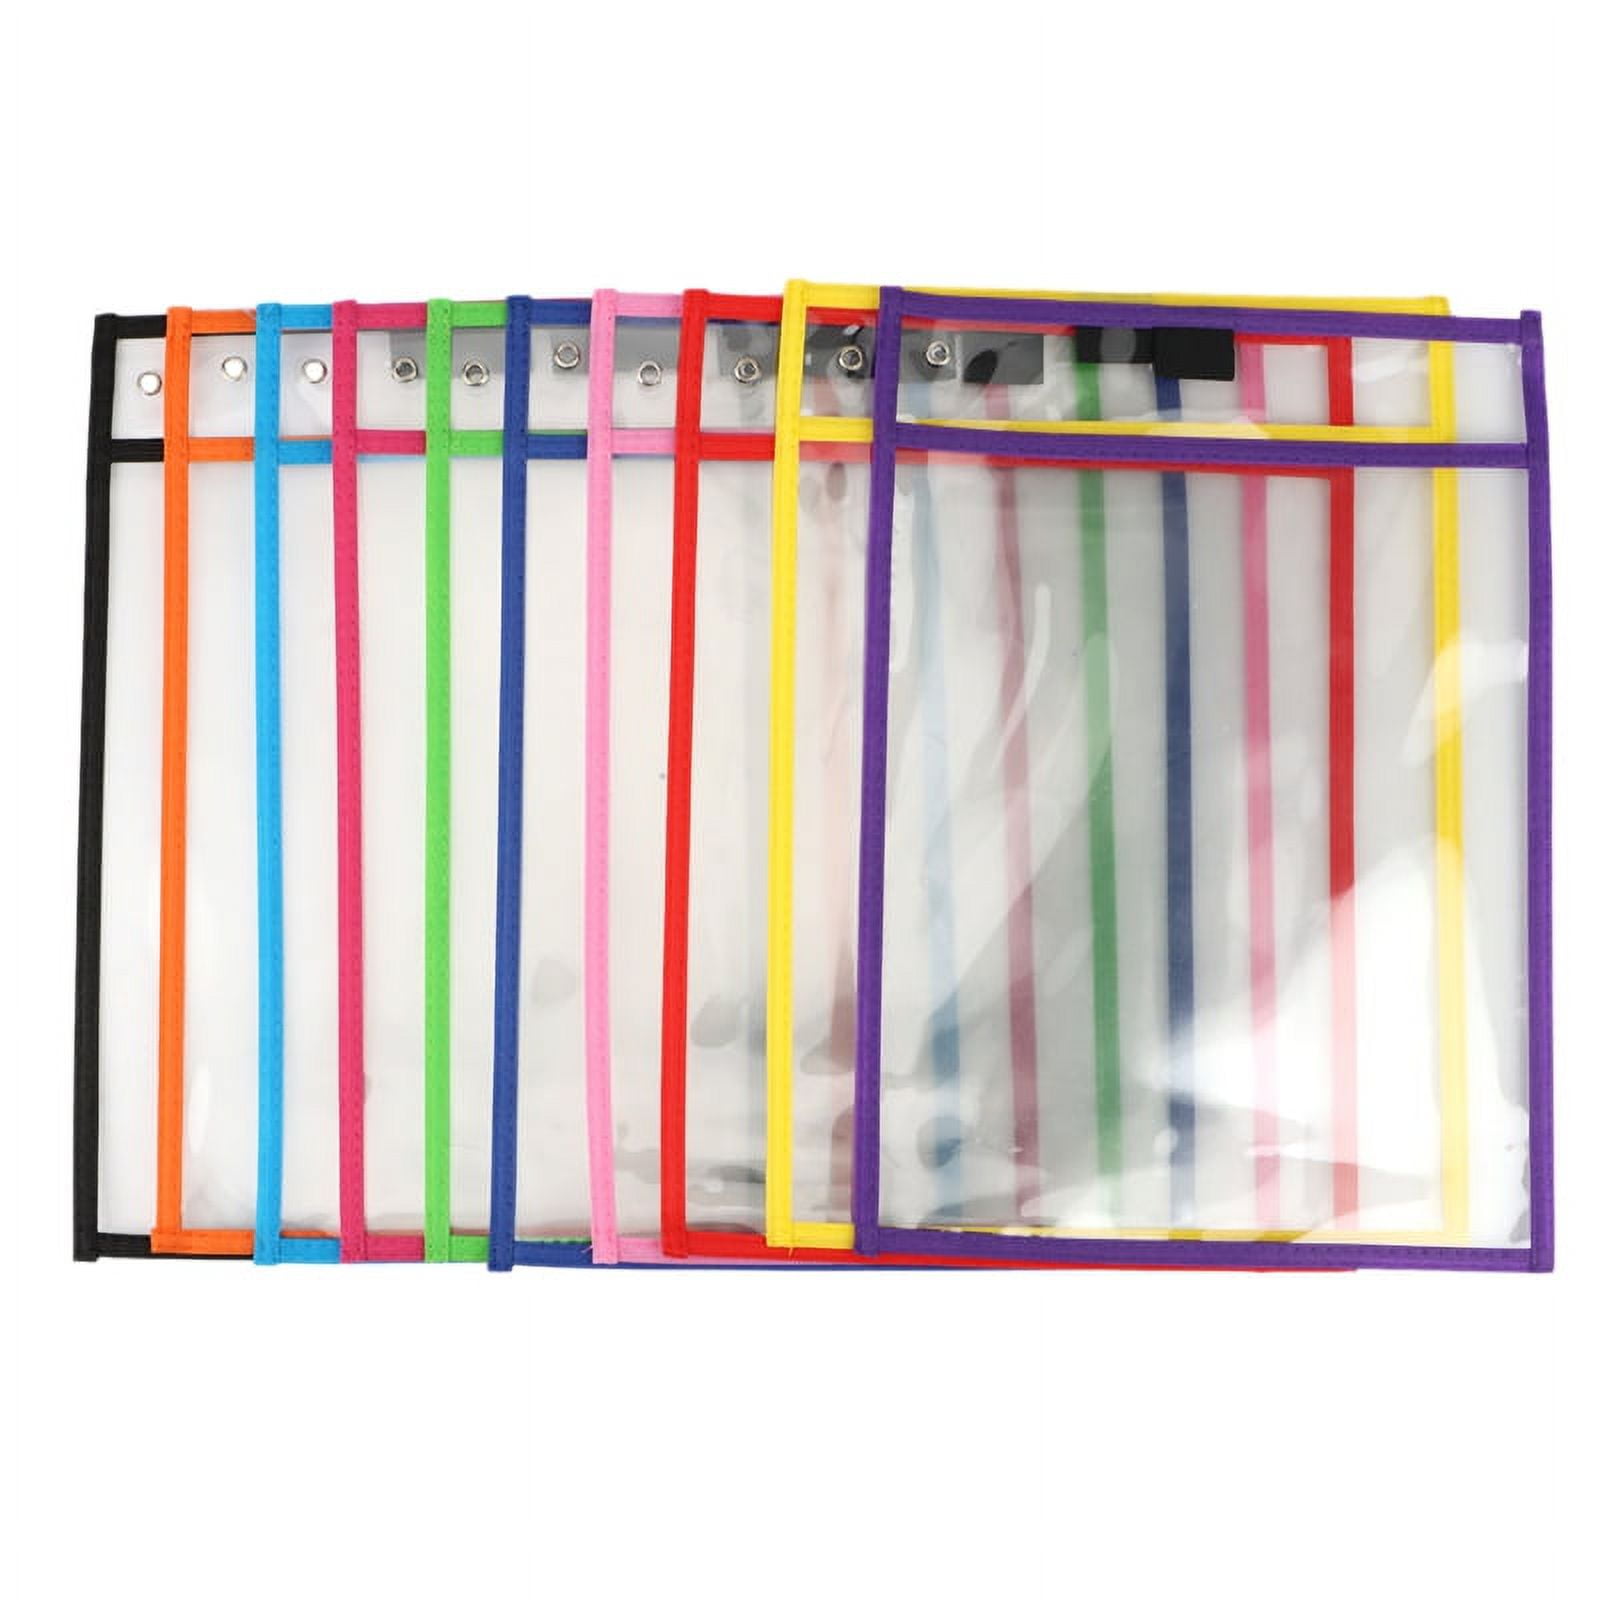 SUNEE Clear Plastic Sleeves for Paper (Transparent, 48 Packs), 8.5x11  Letter Size, Clear Paper Sleeves, Poly File folders, Plastic Document  Sleeve Perfect for Office or School Supply : Buy Online at Best